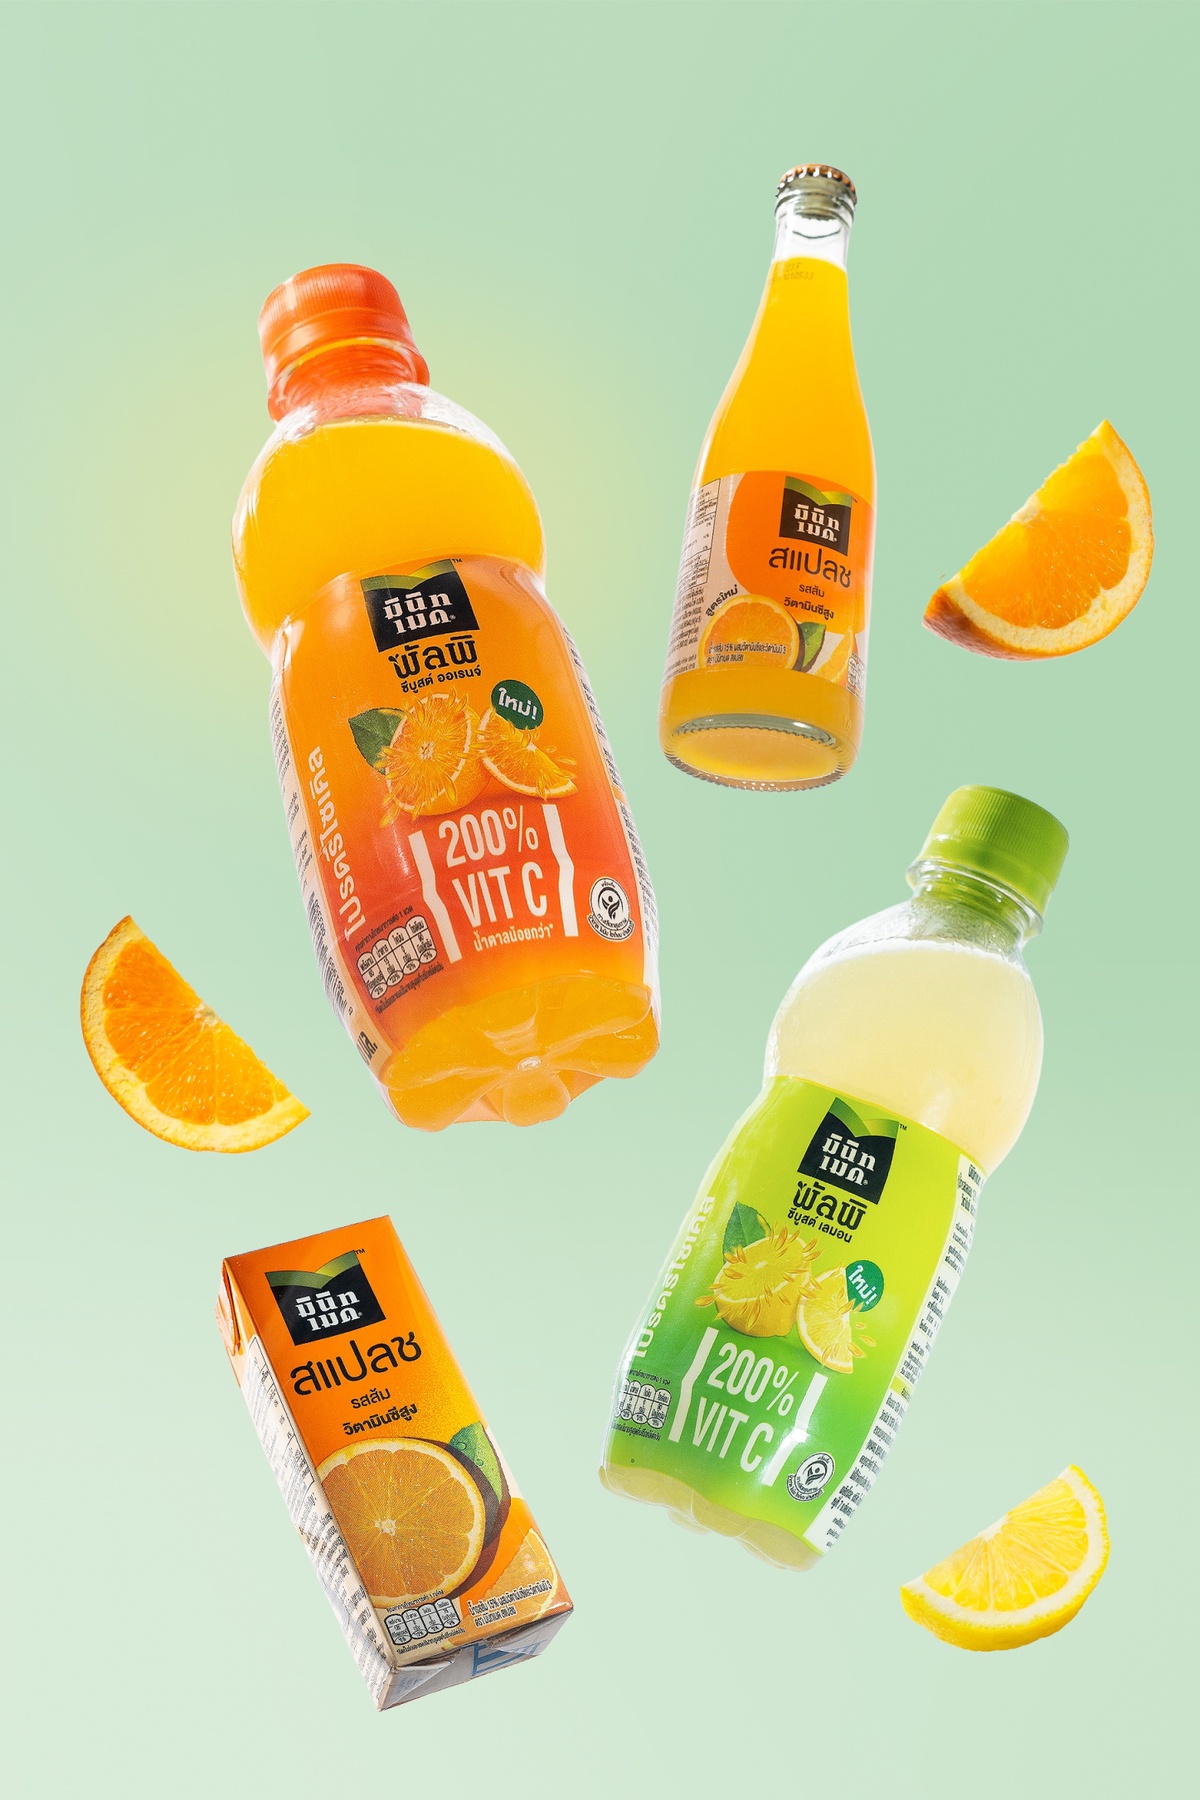 'Coca-Cola' forays into vitamin drinks market with new 'Minute Maid Pulpy' C-Boost, delighting juice lovers with 200% more vitamin C and real fruit